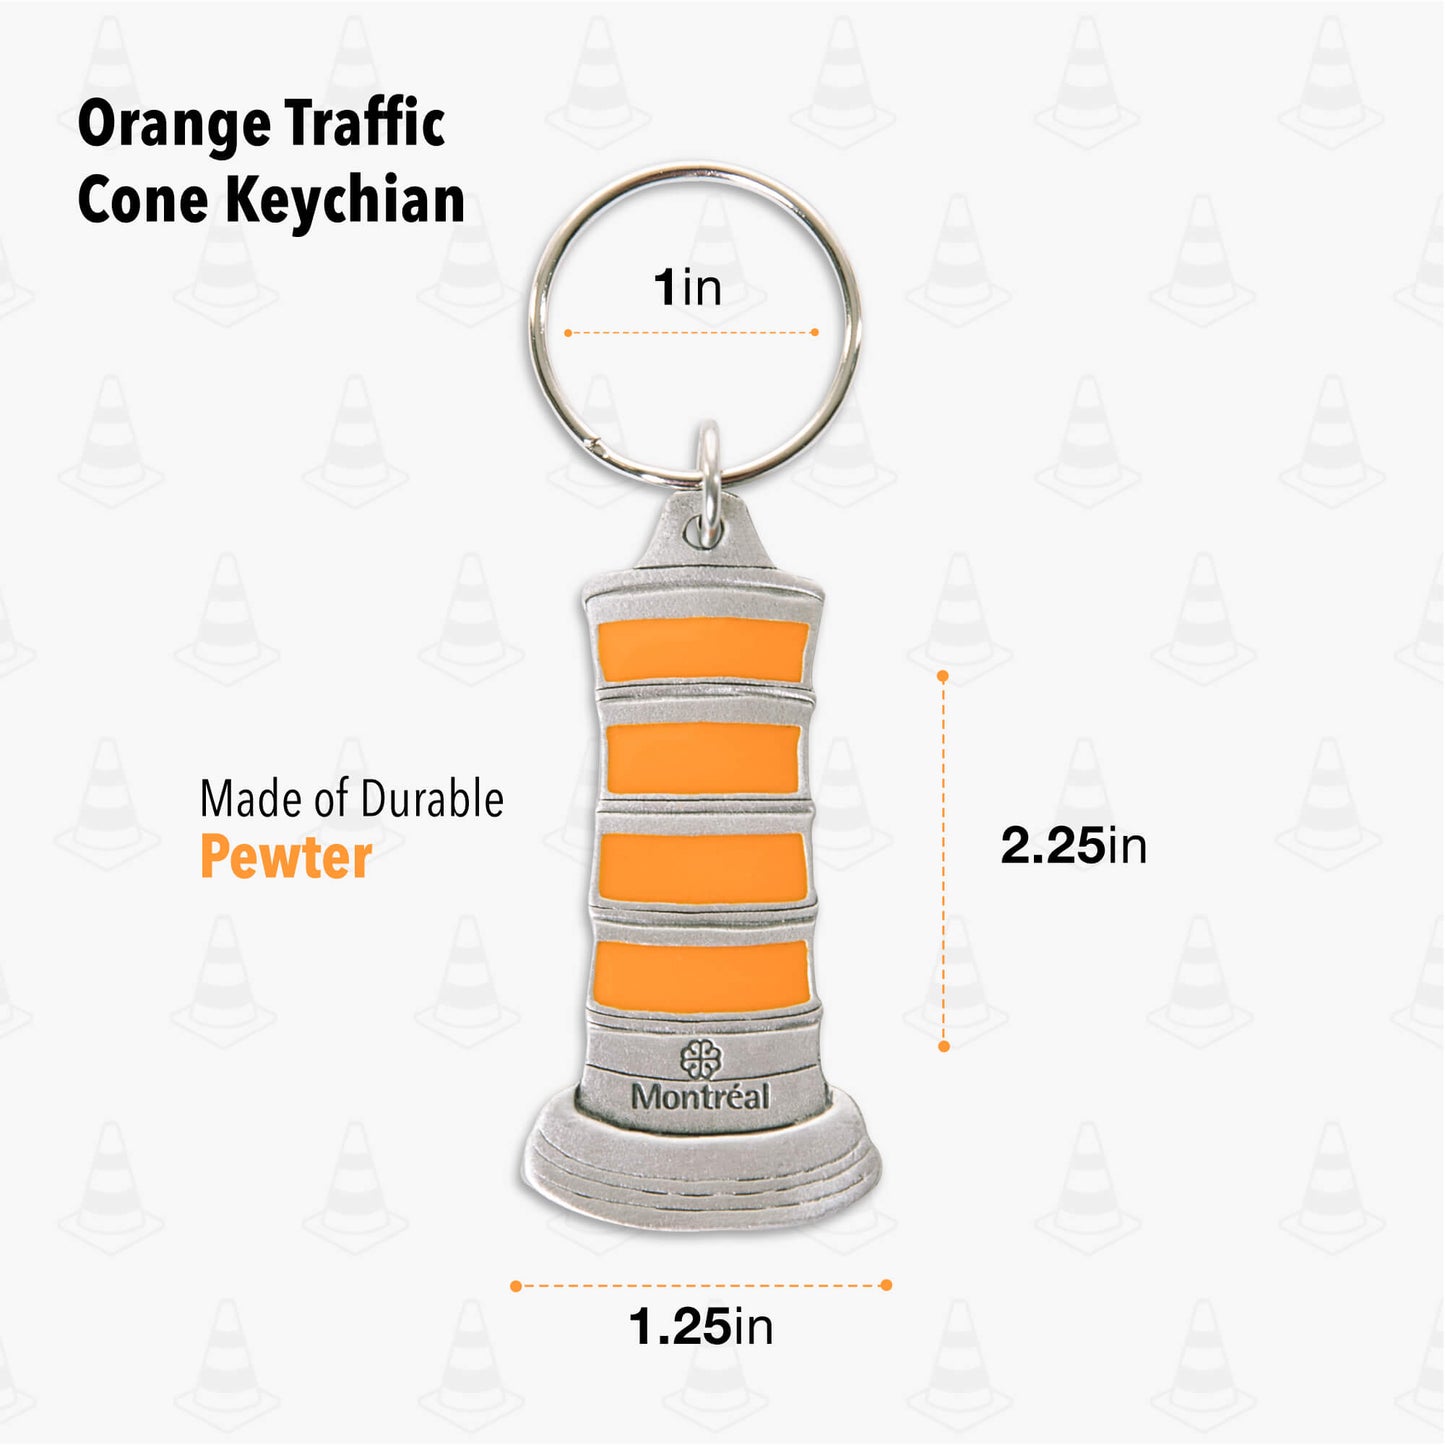 orange traffic cone, pewter keychain, orange paint fill, key ring, montreal, gift, souvenir, dimensions